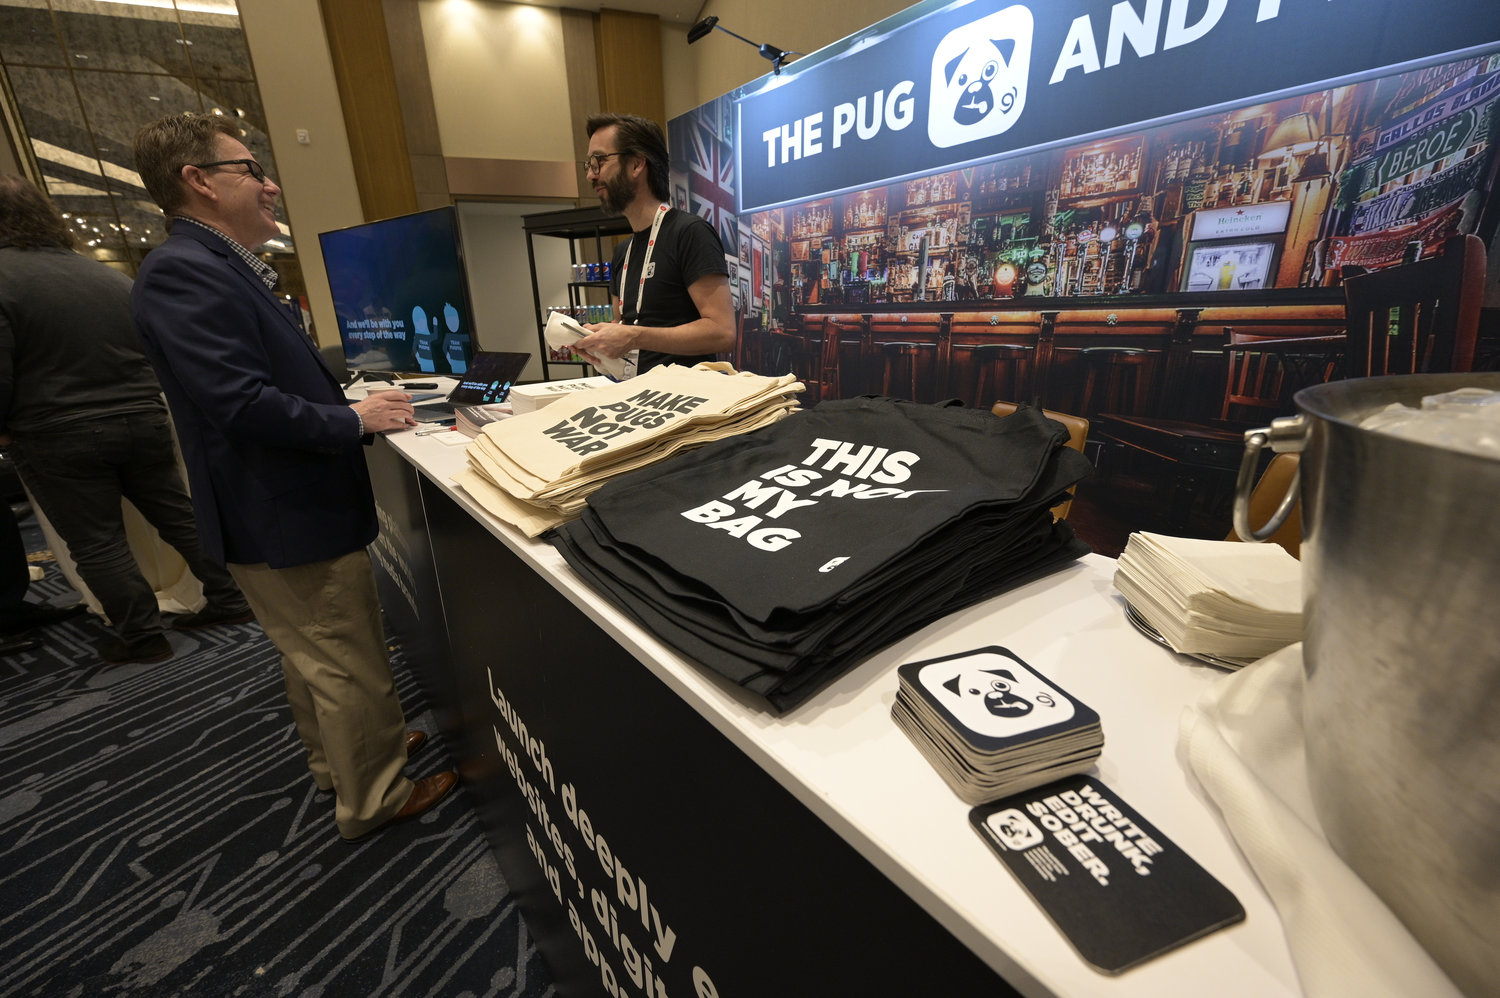 This premium space was sponsored by Pugpig -- offering cold drinks throughout the conference and a beer pub (The Pug and The Pig) during receptions. (Photo by Phelan M. Ebenhack)